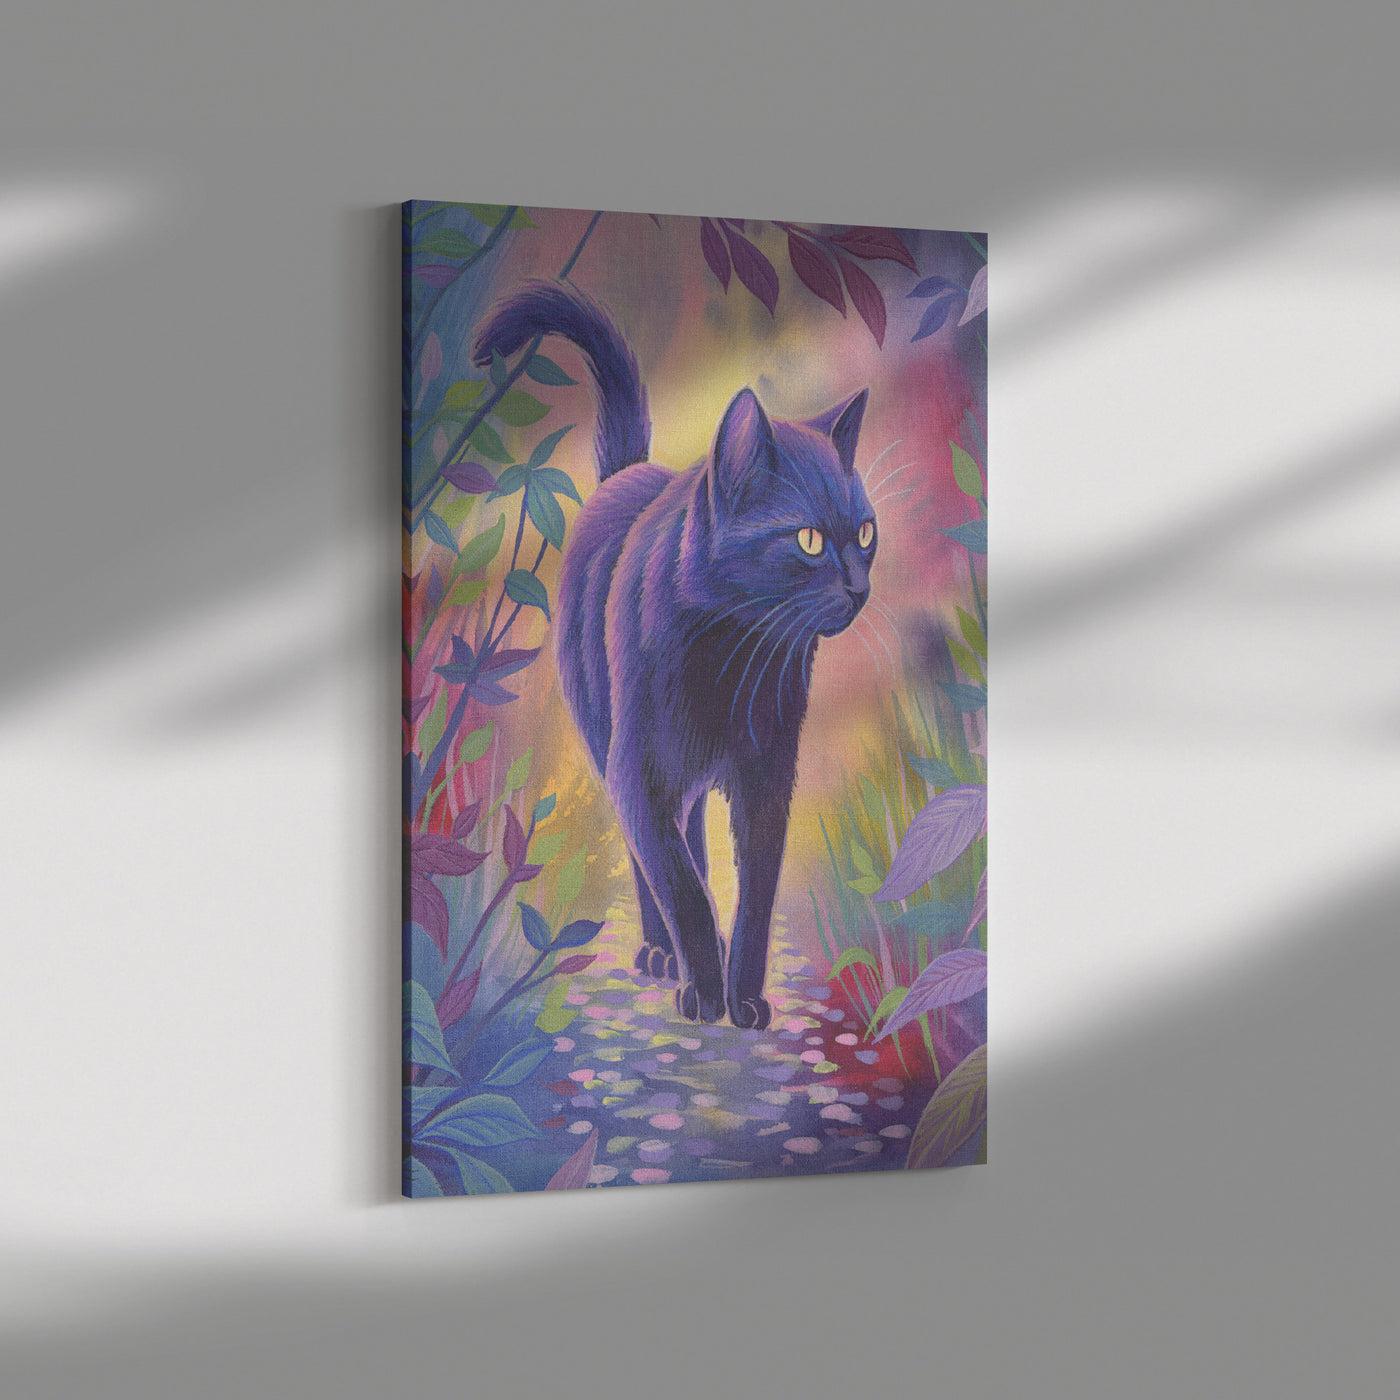 Canvas Art Print of a black cat walking on a cobblestone path surrounded by colorful, lush foliage, with light casting shadows and highlights on its fur.